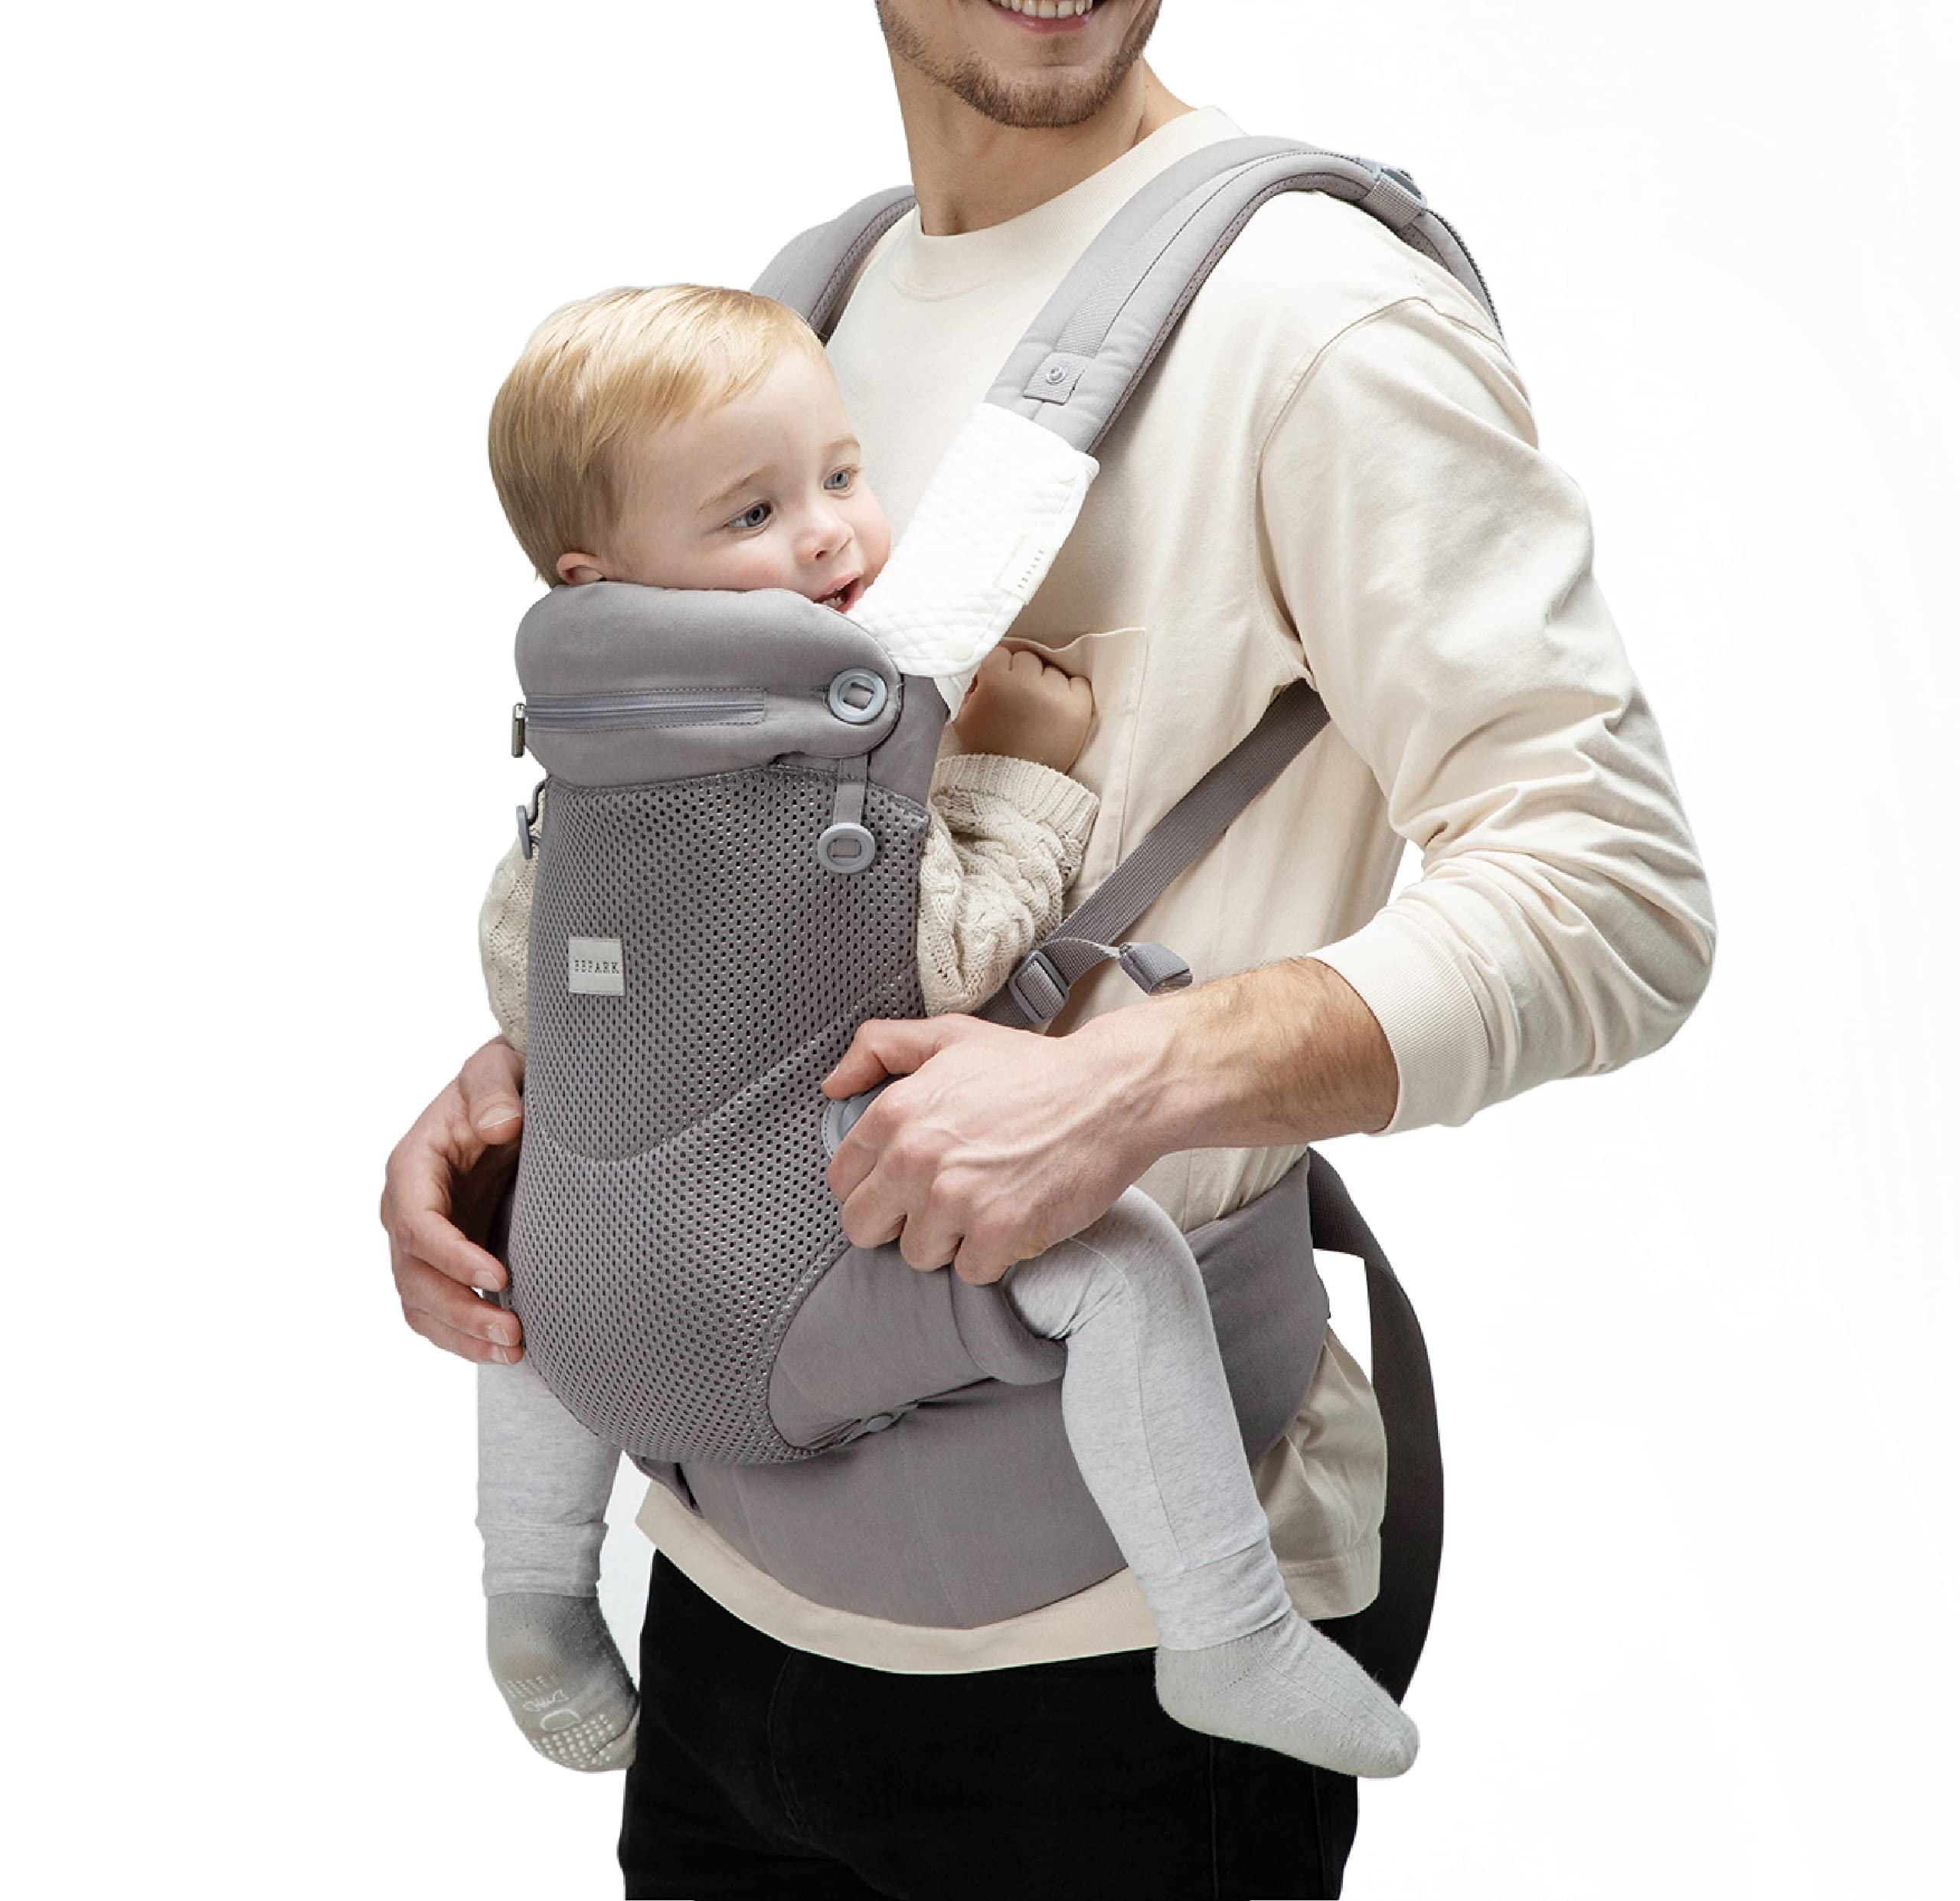 Bbpark Mesh Baby Carrier Newborn to Toddler, Facing-in and Facing-Out Front and Back Holder Kangaroo Carrier for Infant Grey